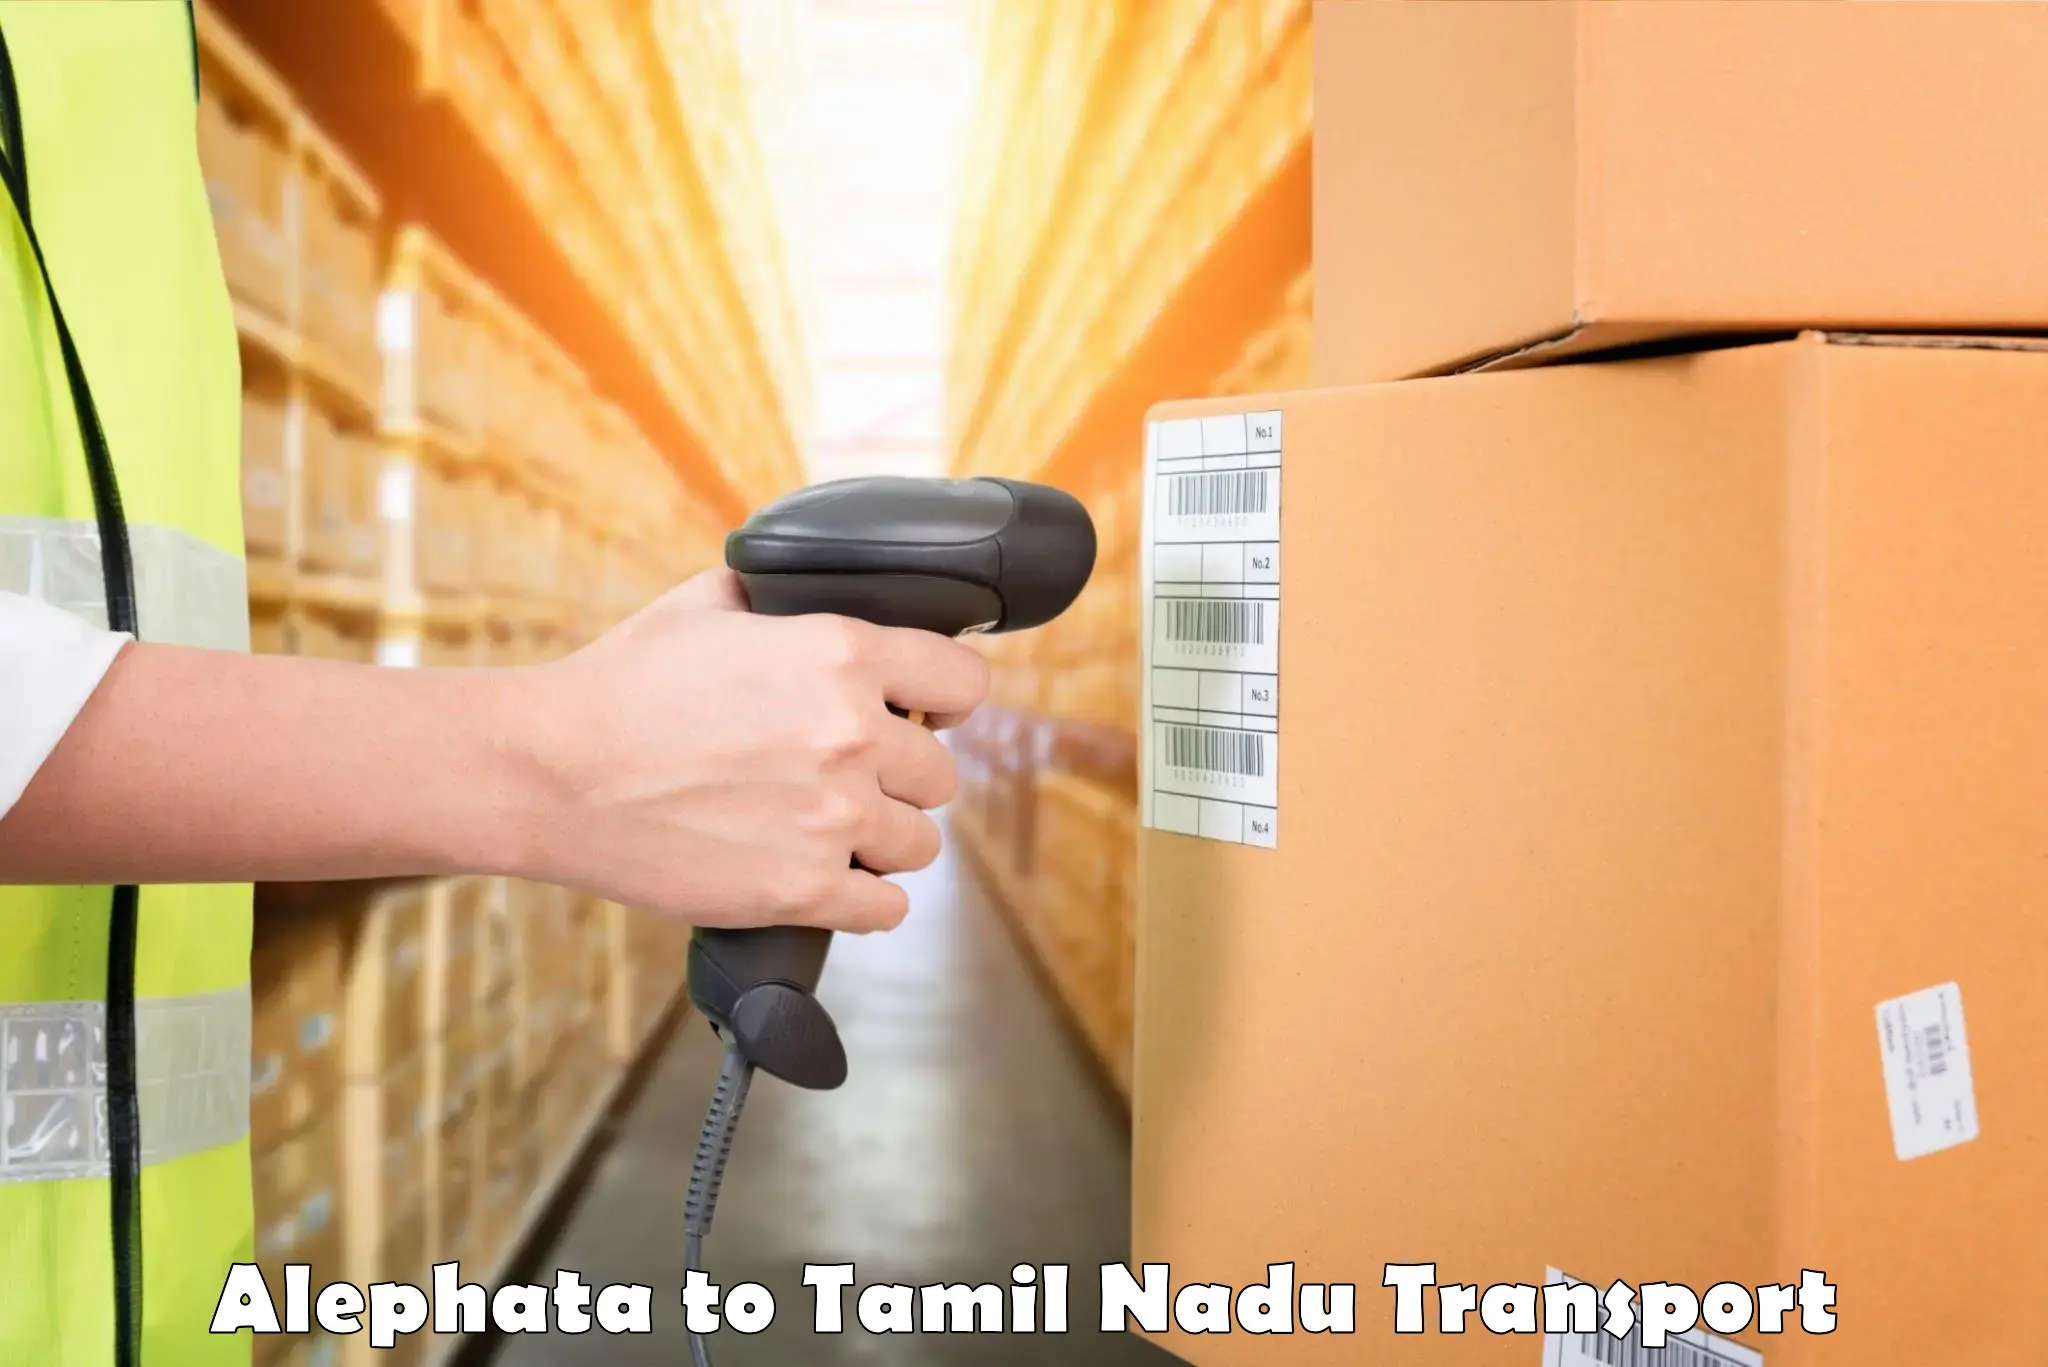 Shipping services Alephata to Sivaganga